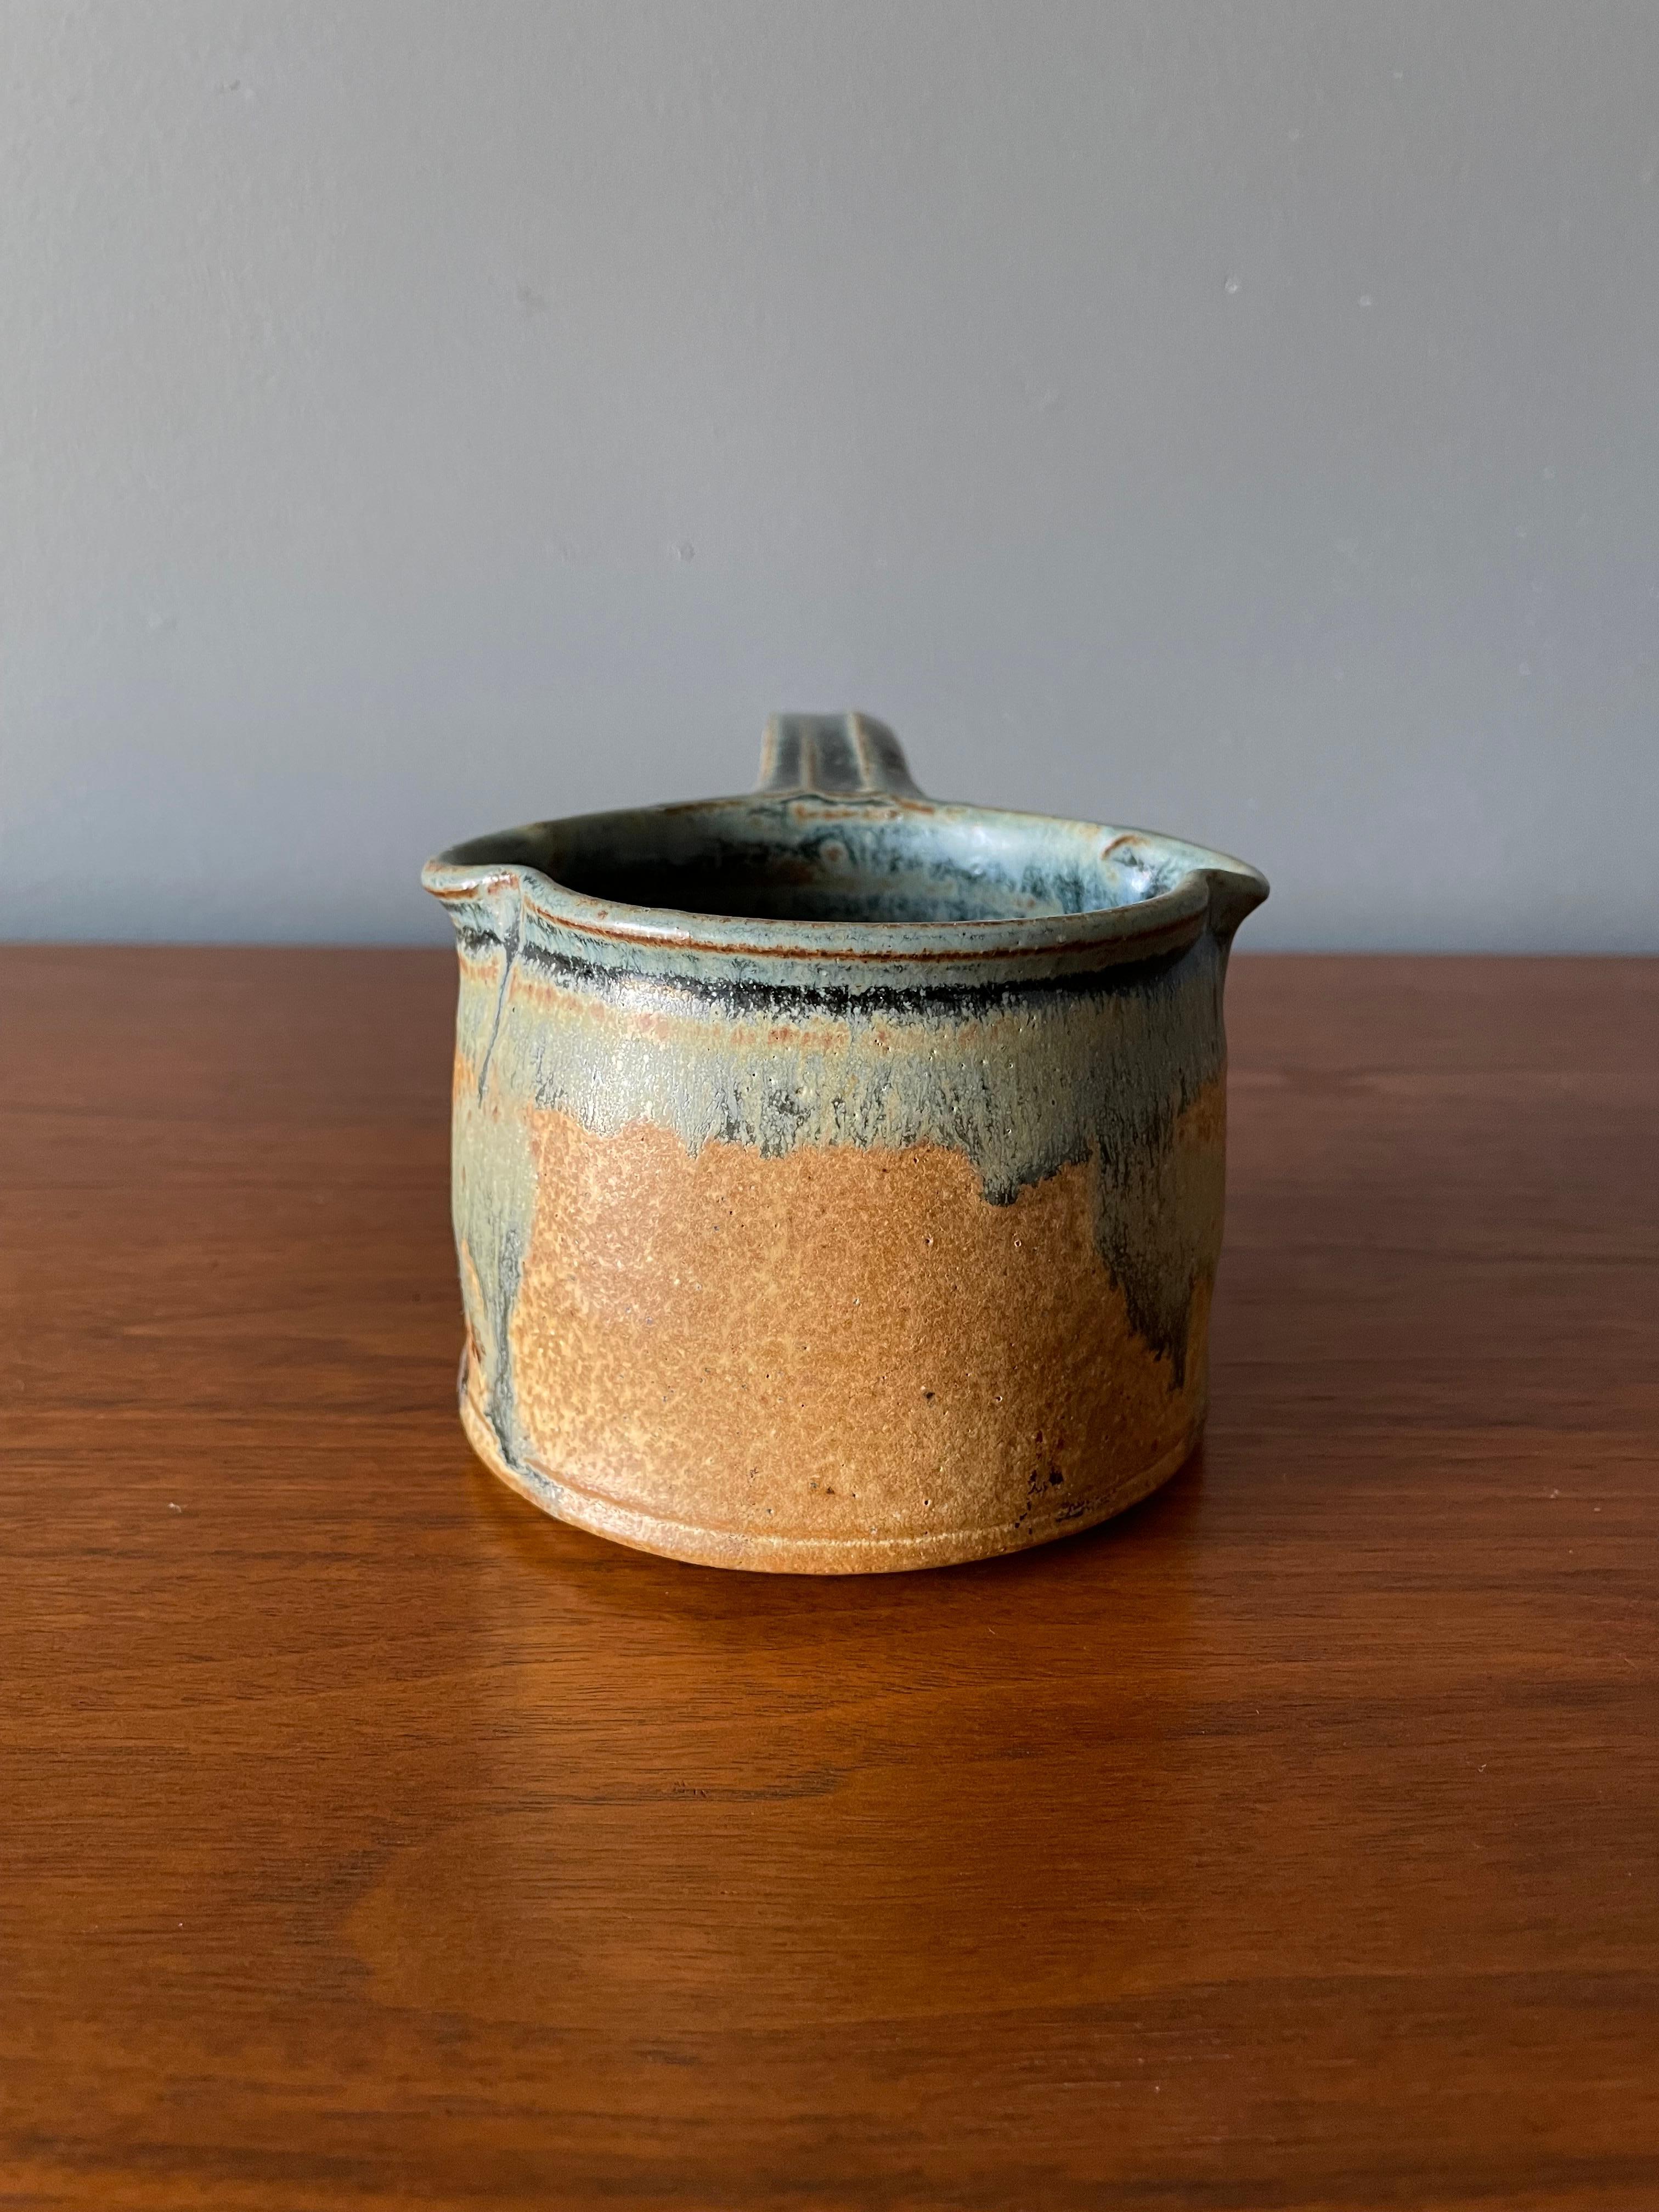 Vintage studio crafted pottery with handle. Beautifully crafted with a unique glazing.